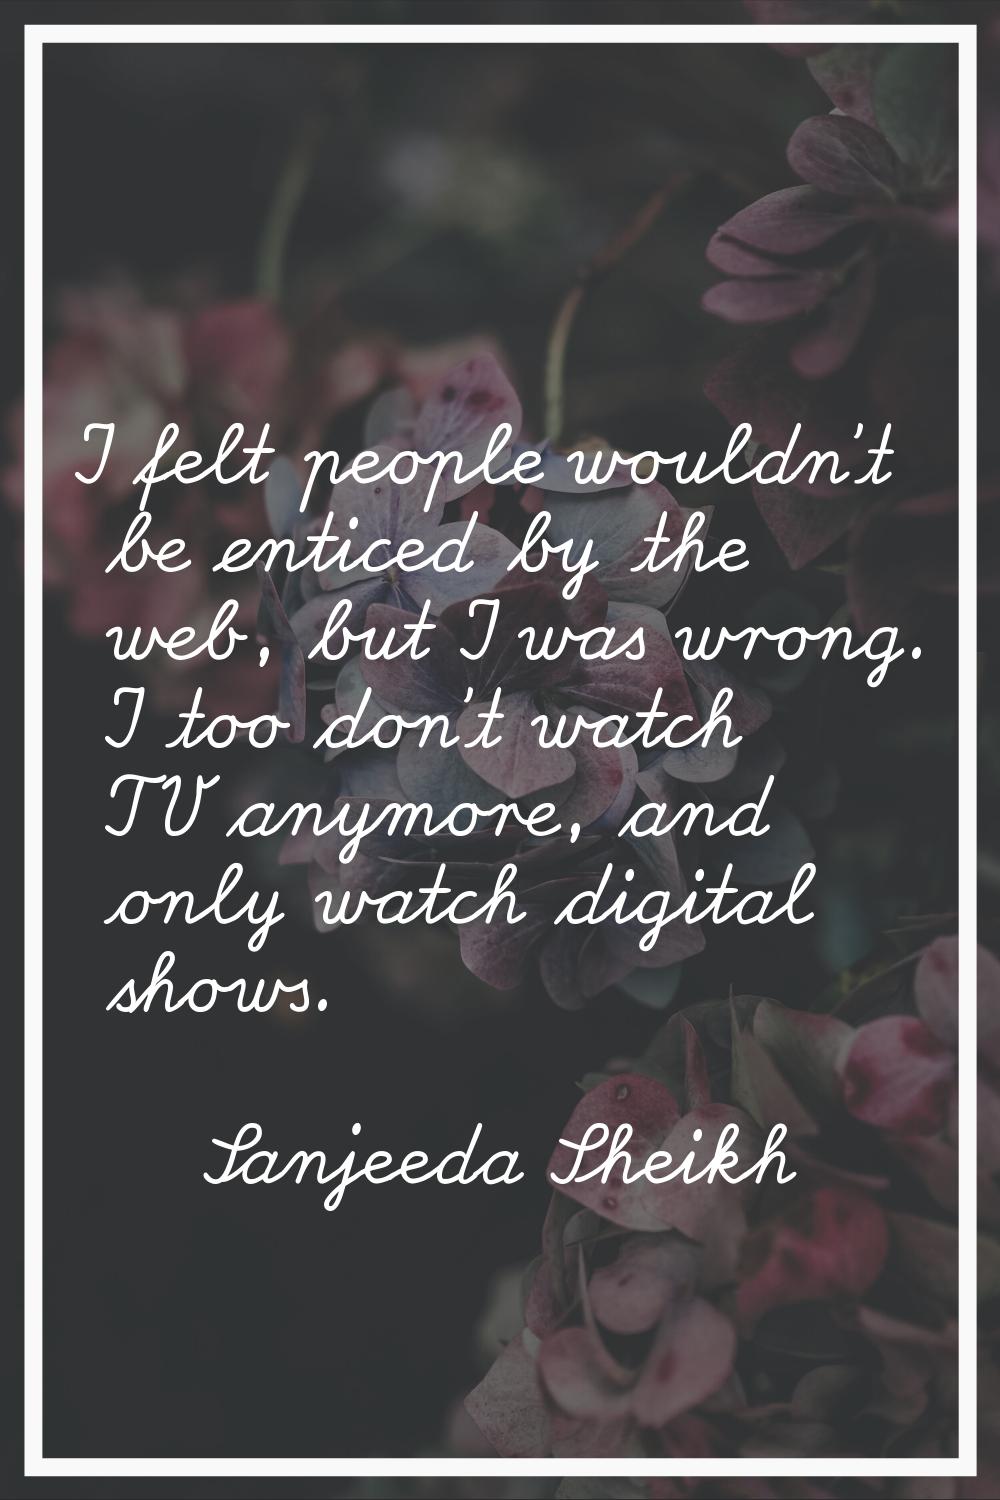 I felt people wouldn't be enticed by the web, but I was wrong. I too don't watch TV anymore, and on